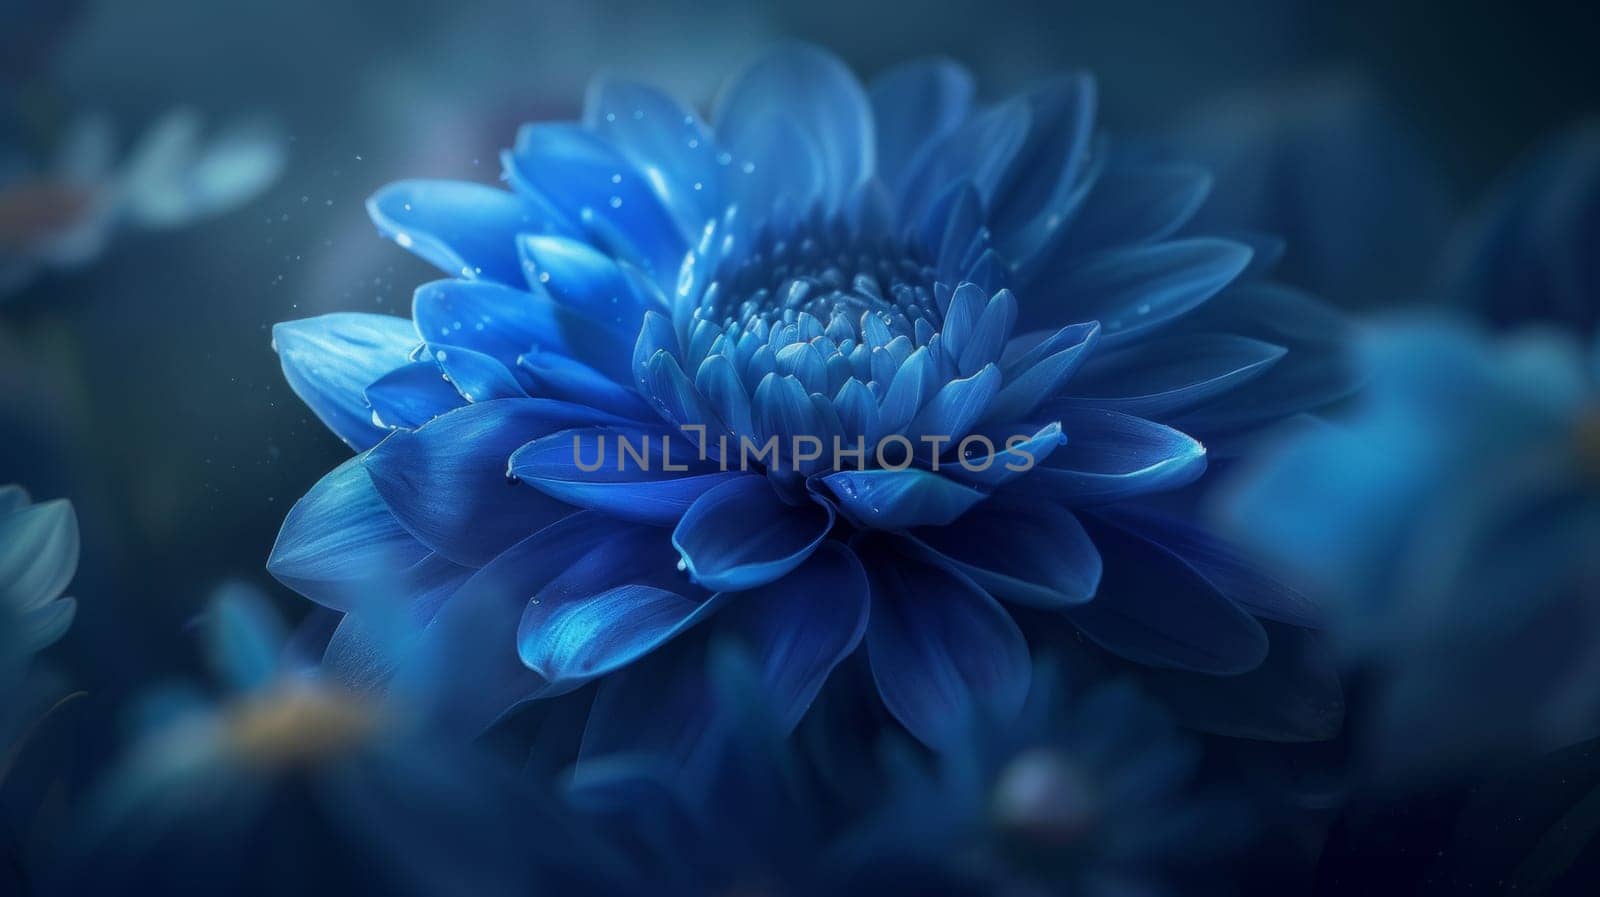 A close up of a blue flower with water droplets on it